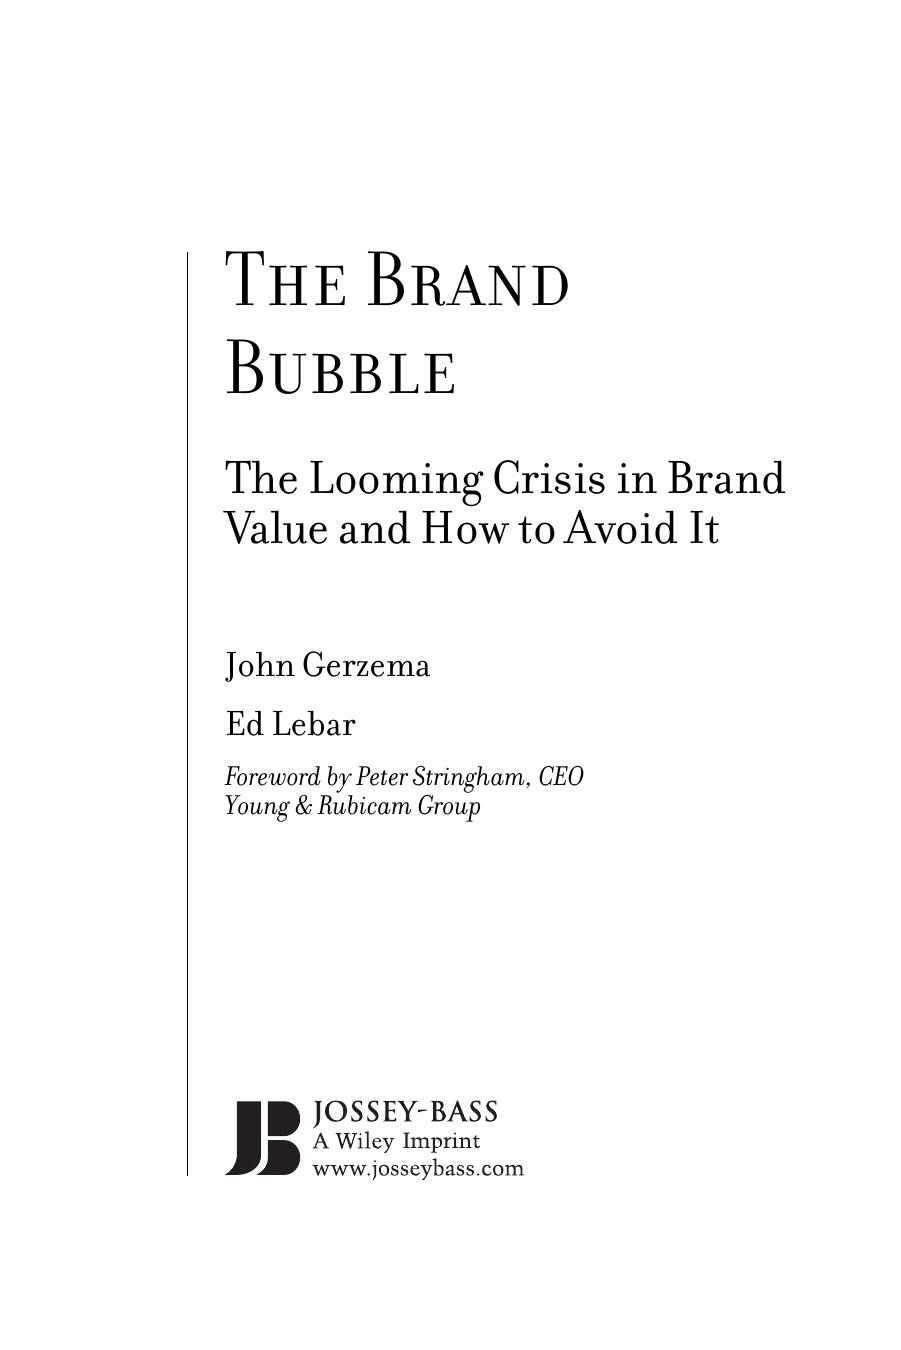 John_Gerzema,_Edward_Lebar_The_Brand_Bubble_The_Looming_Crisis_in_Brand_Value_and_How_to_Avoid_It__2008